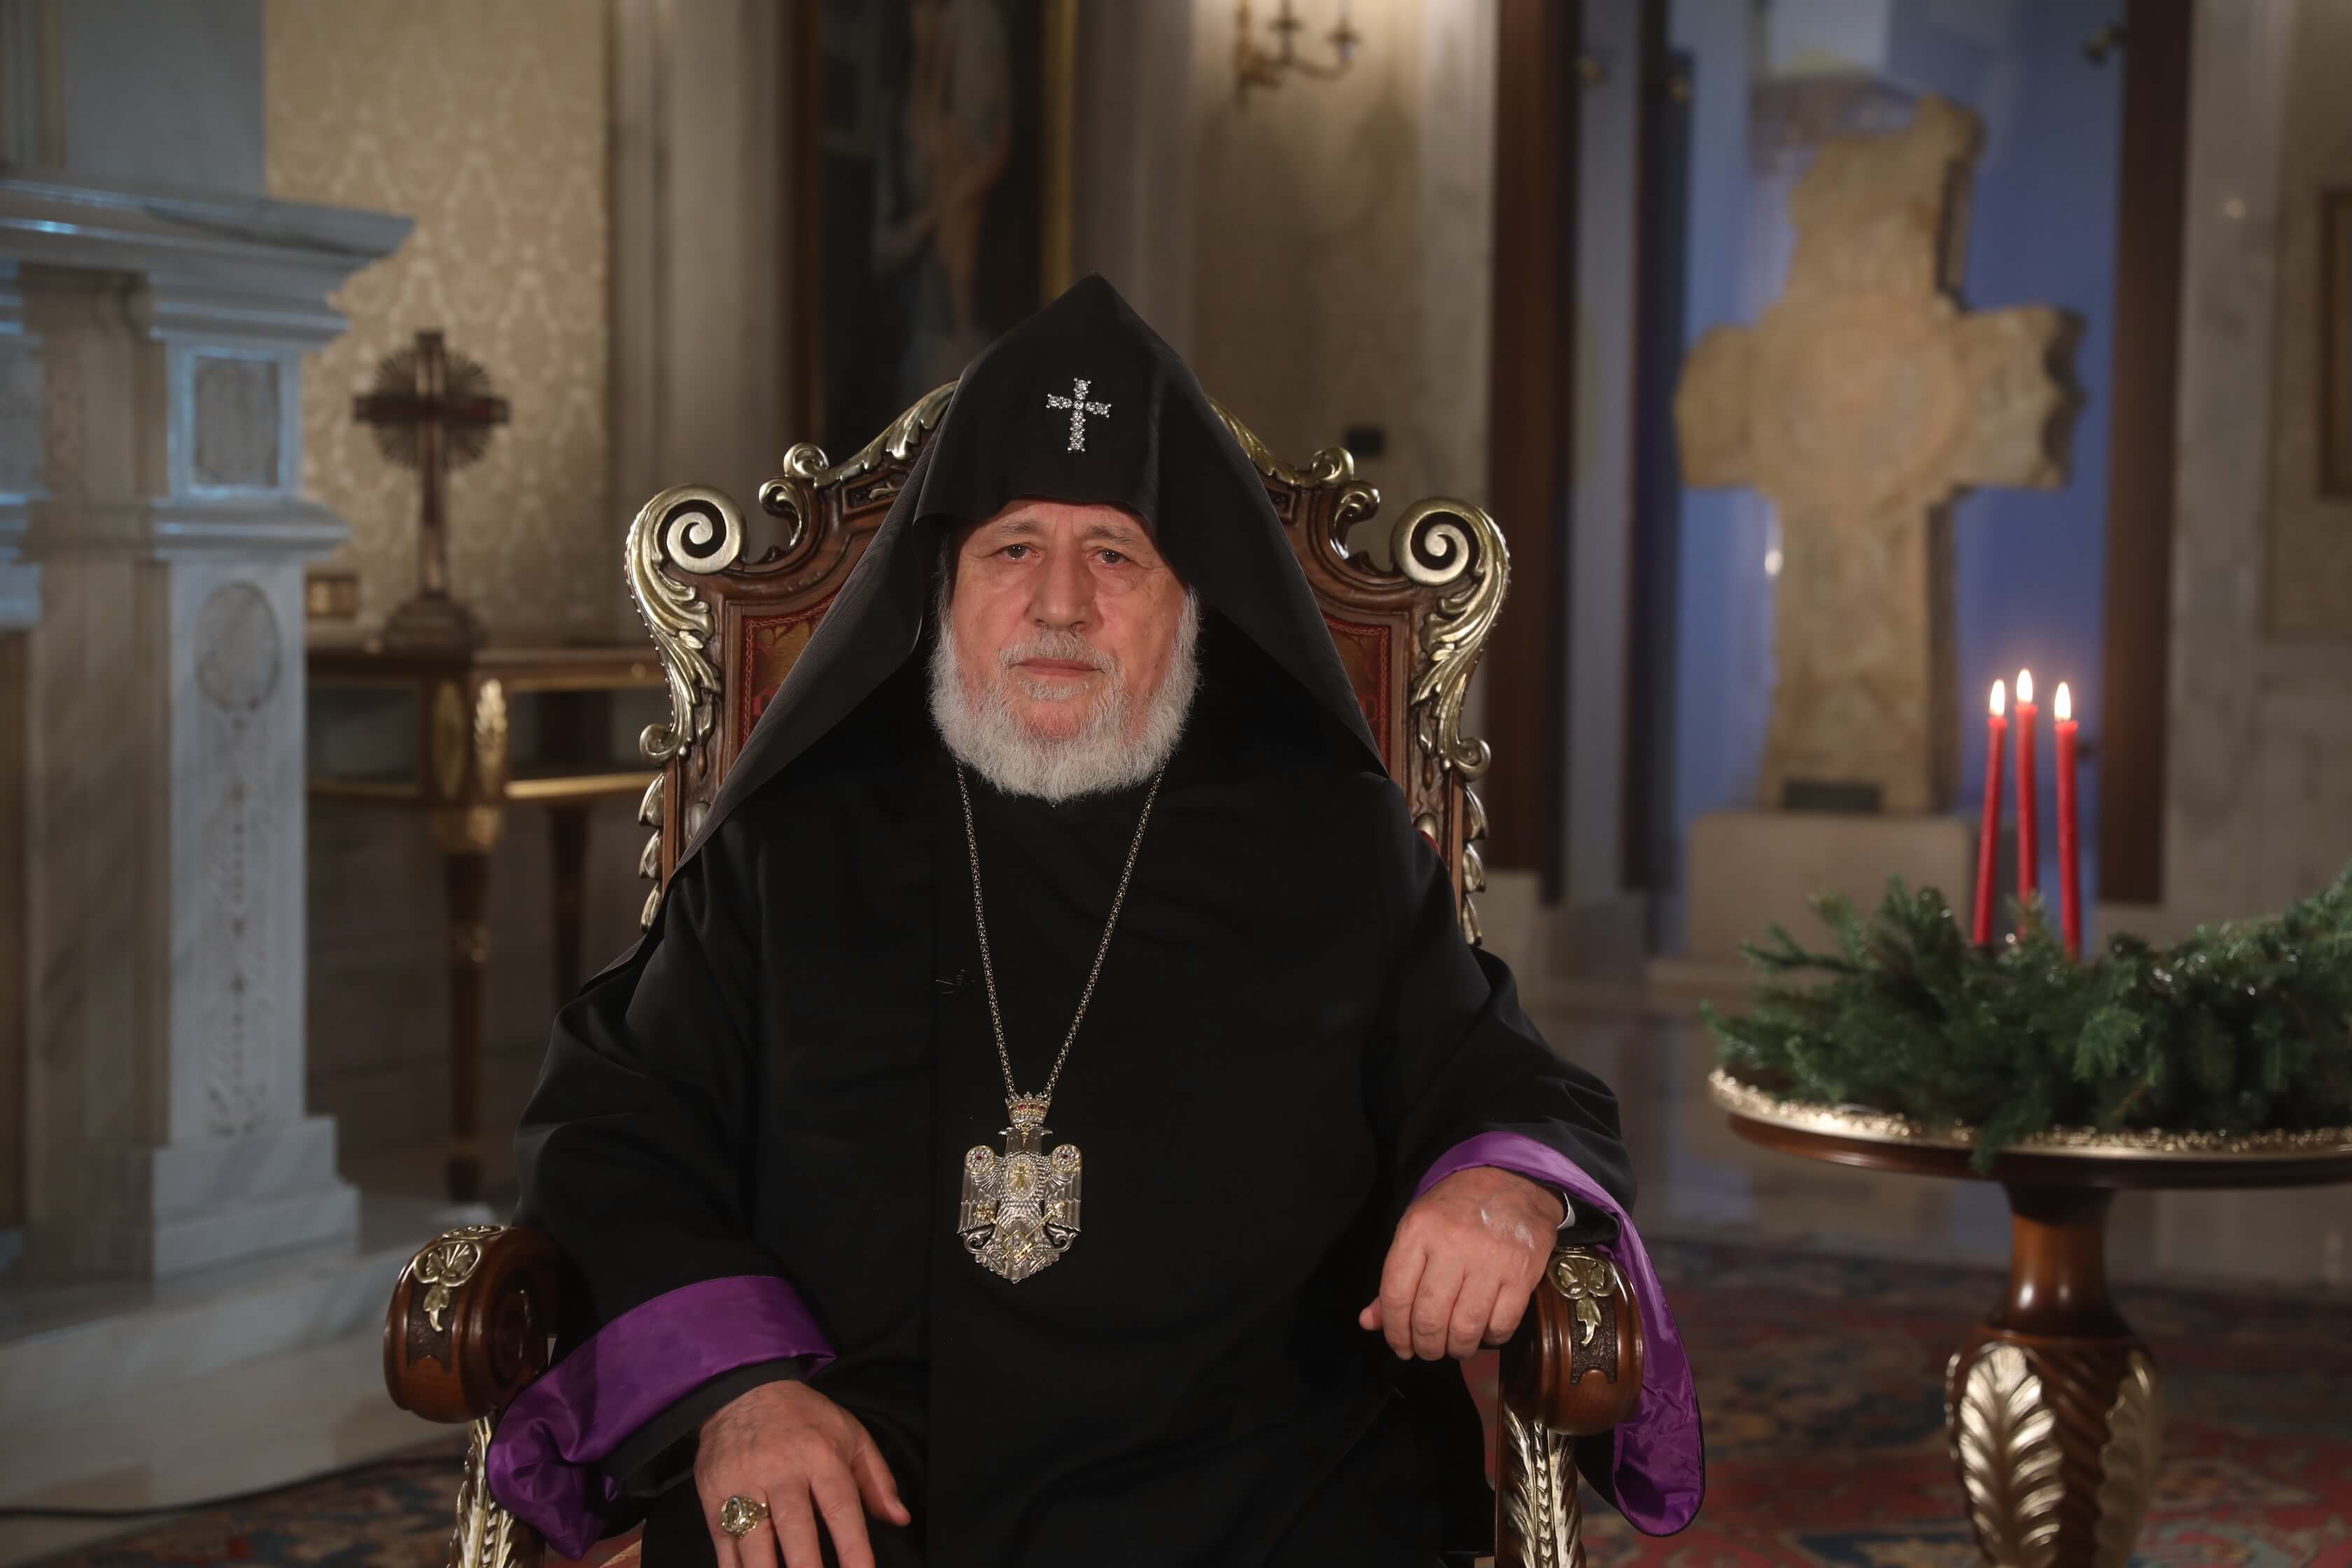 The message of His Holiness Karekin II Supreme Patriarch and Catholicos of All Armenians on the feast of the Holy Nativity and Theophany of our lord Jesus Christ